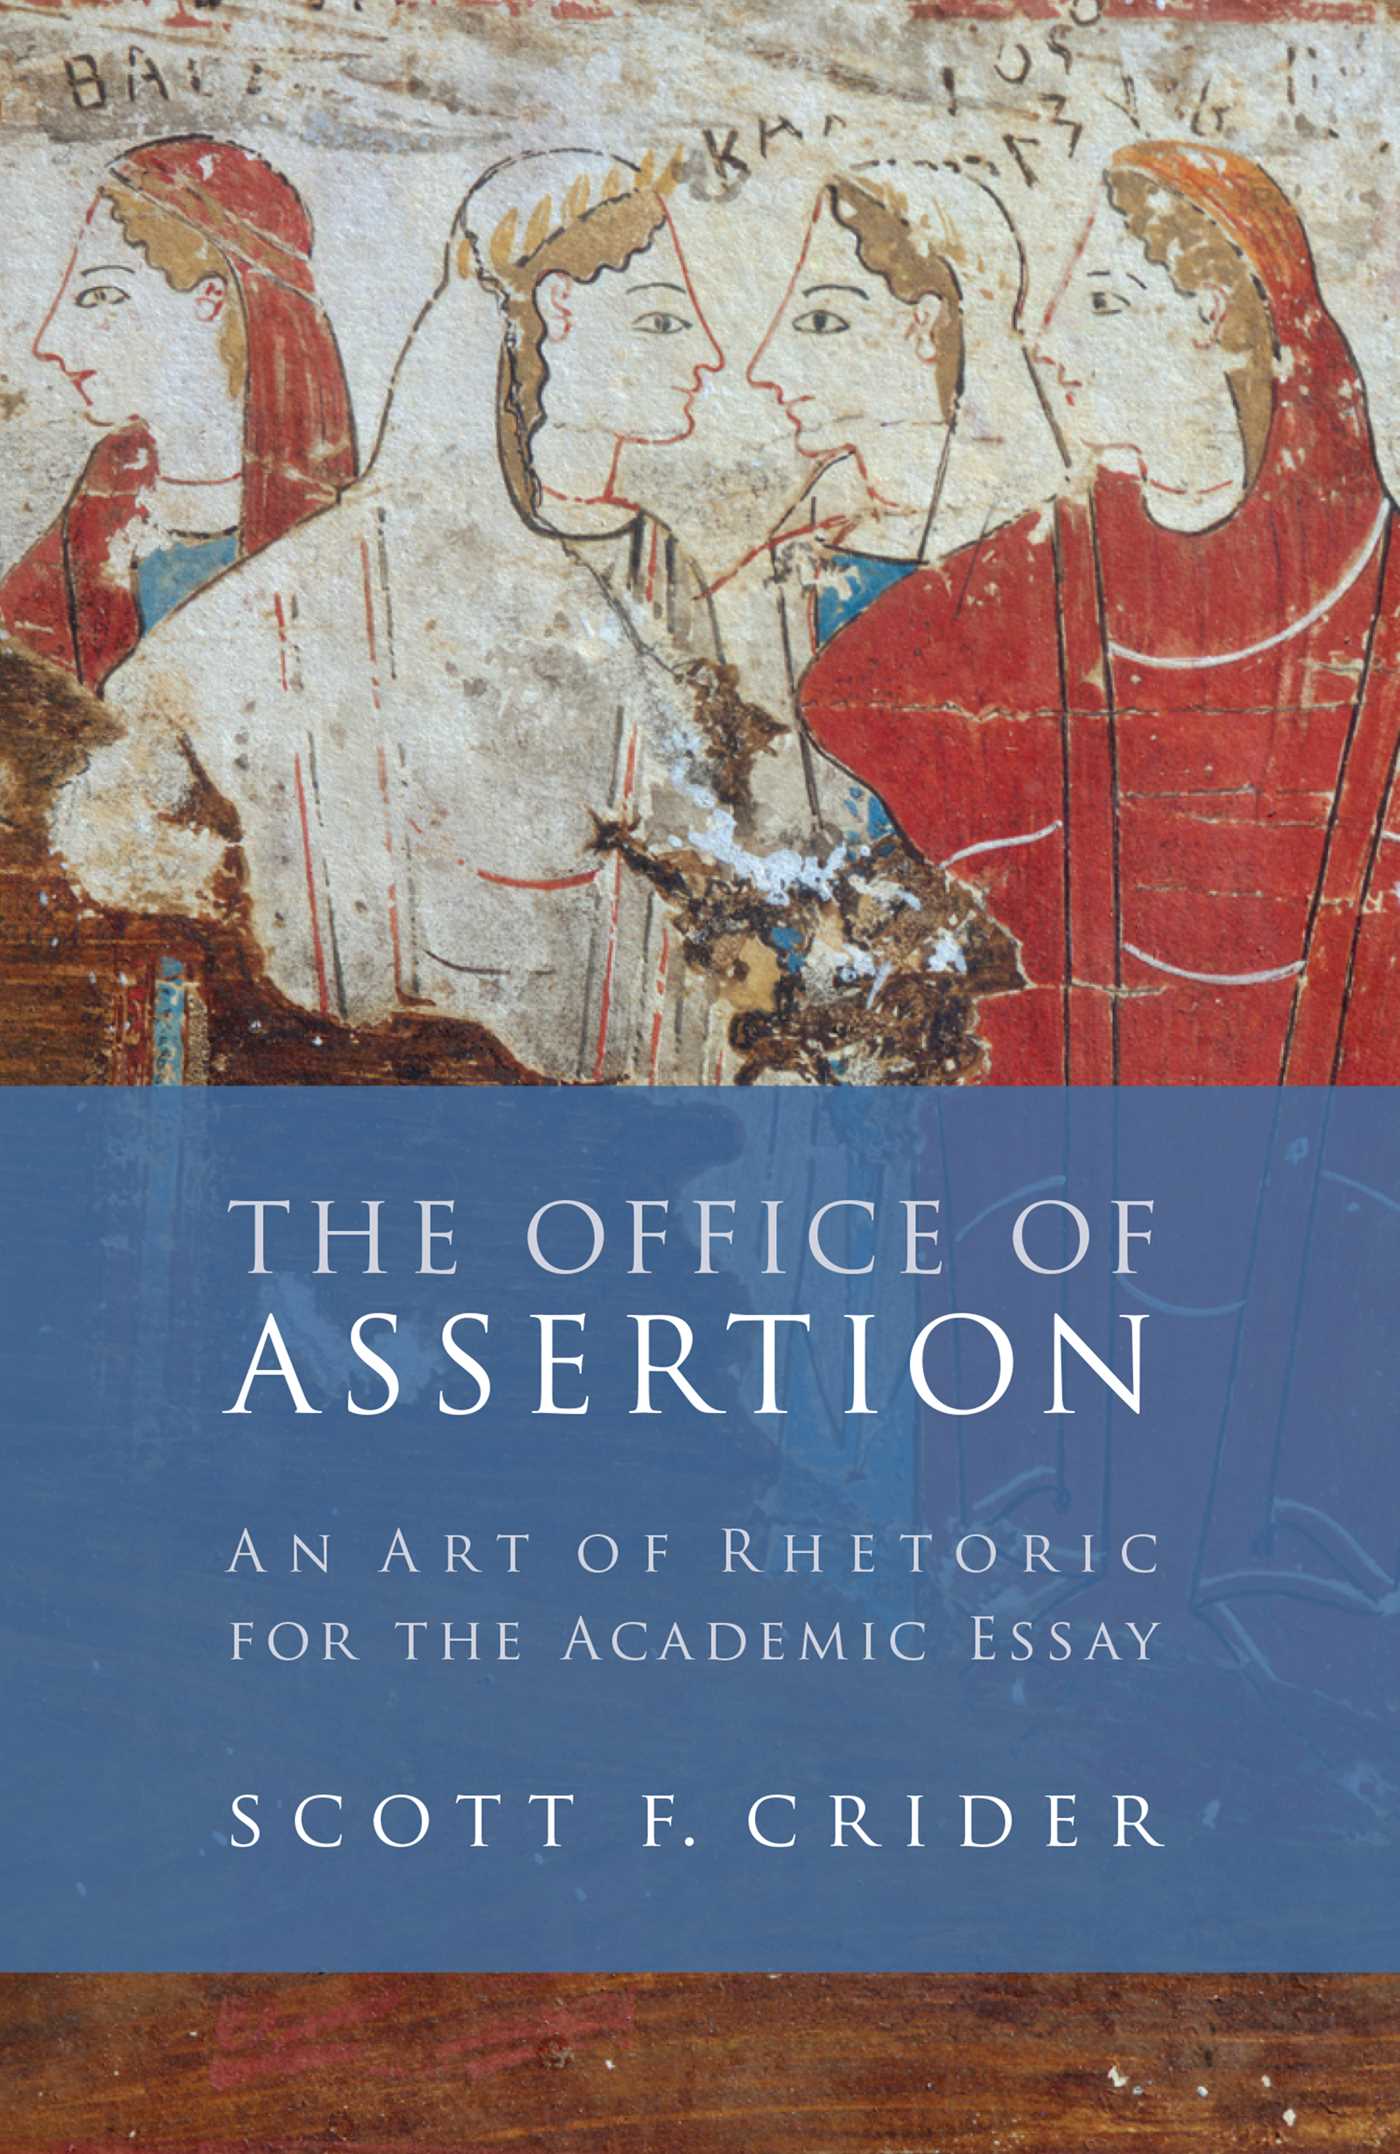 The Office of Assertion